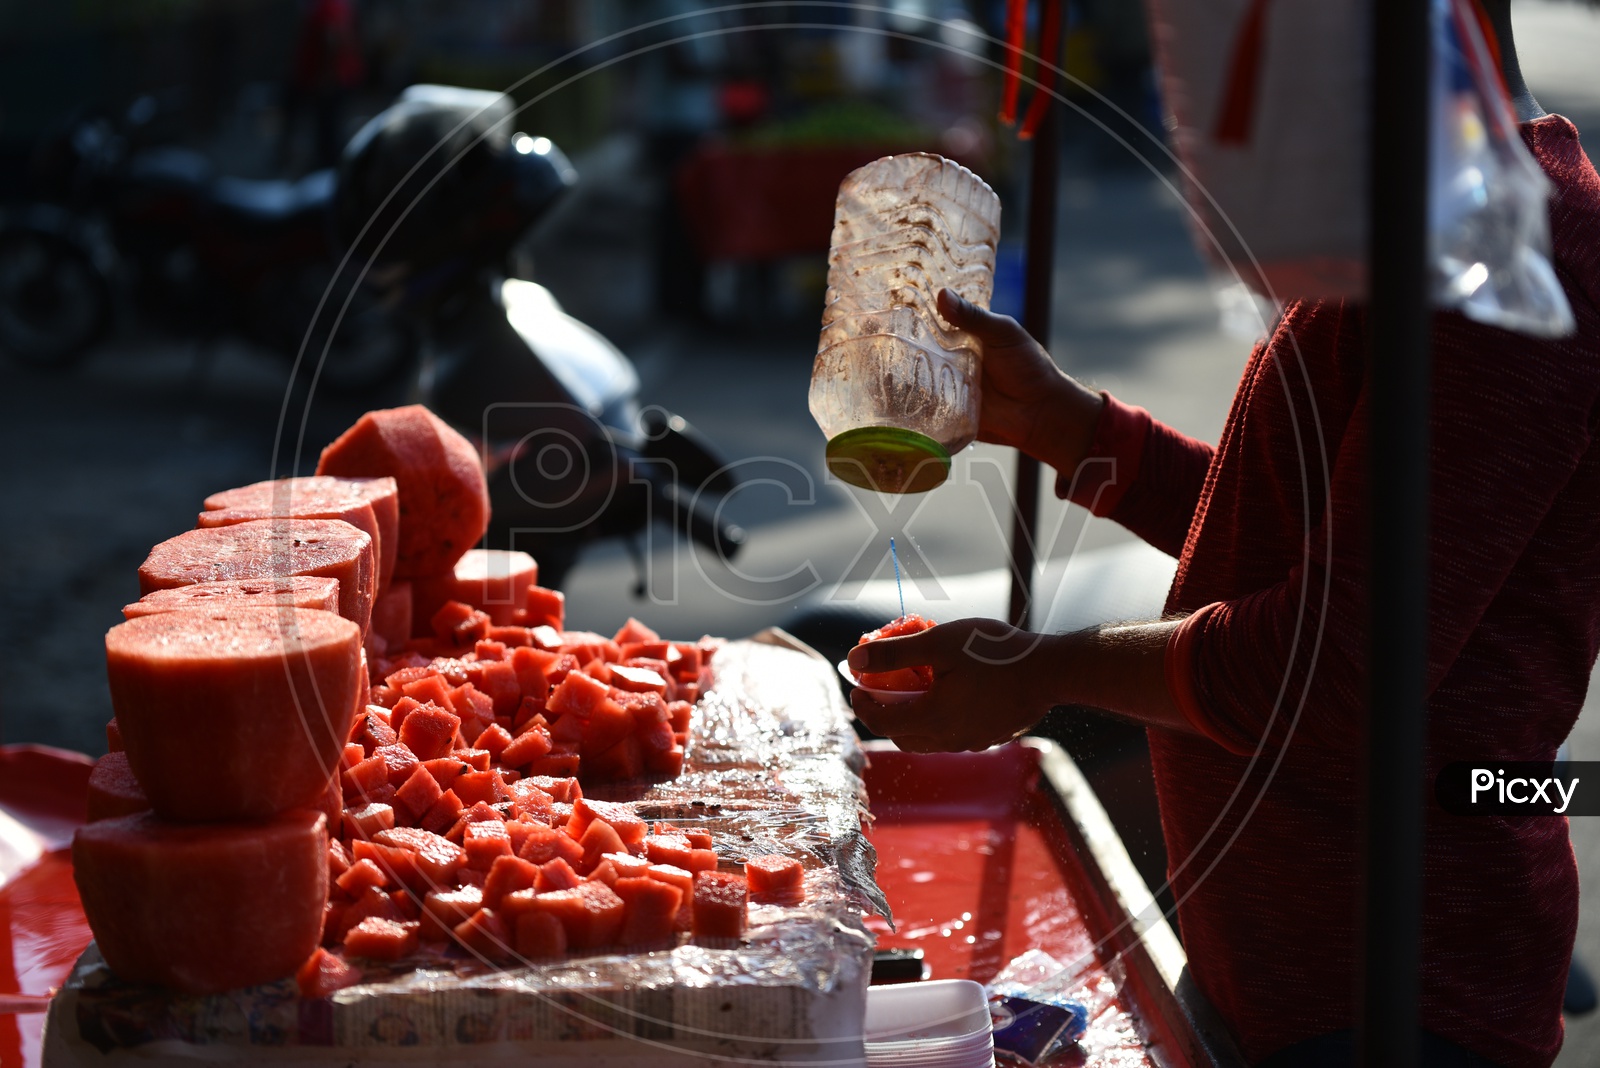 Street Vendor Stalls Of Watermelon Pieces at Roadsides for Summer